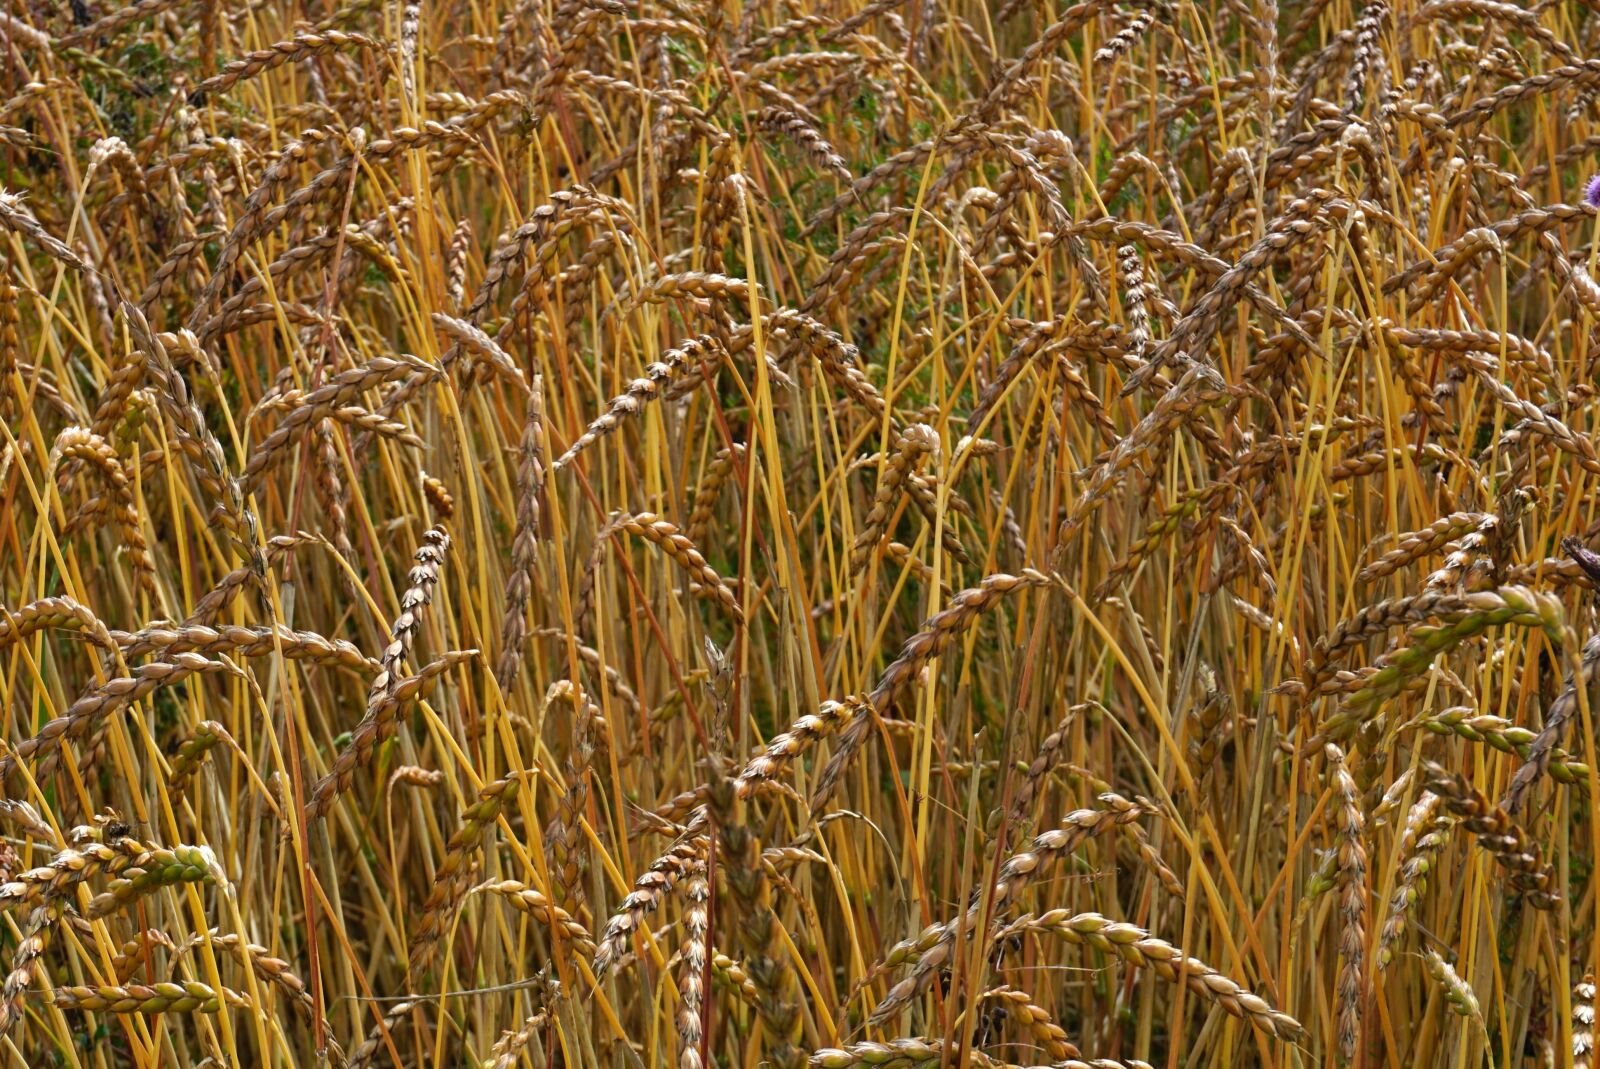 Sony a6000 sample photo. Cereals, spike, wheat field photography